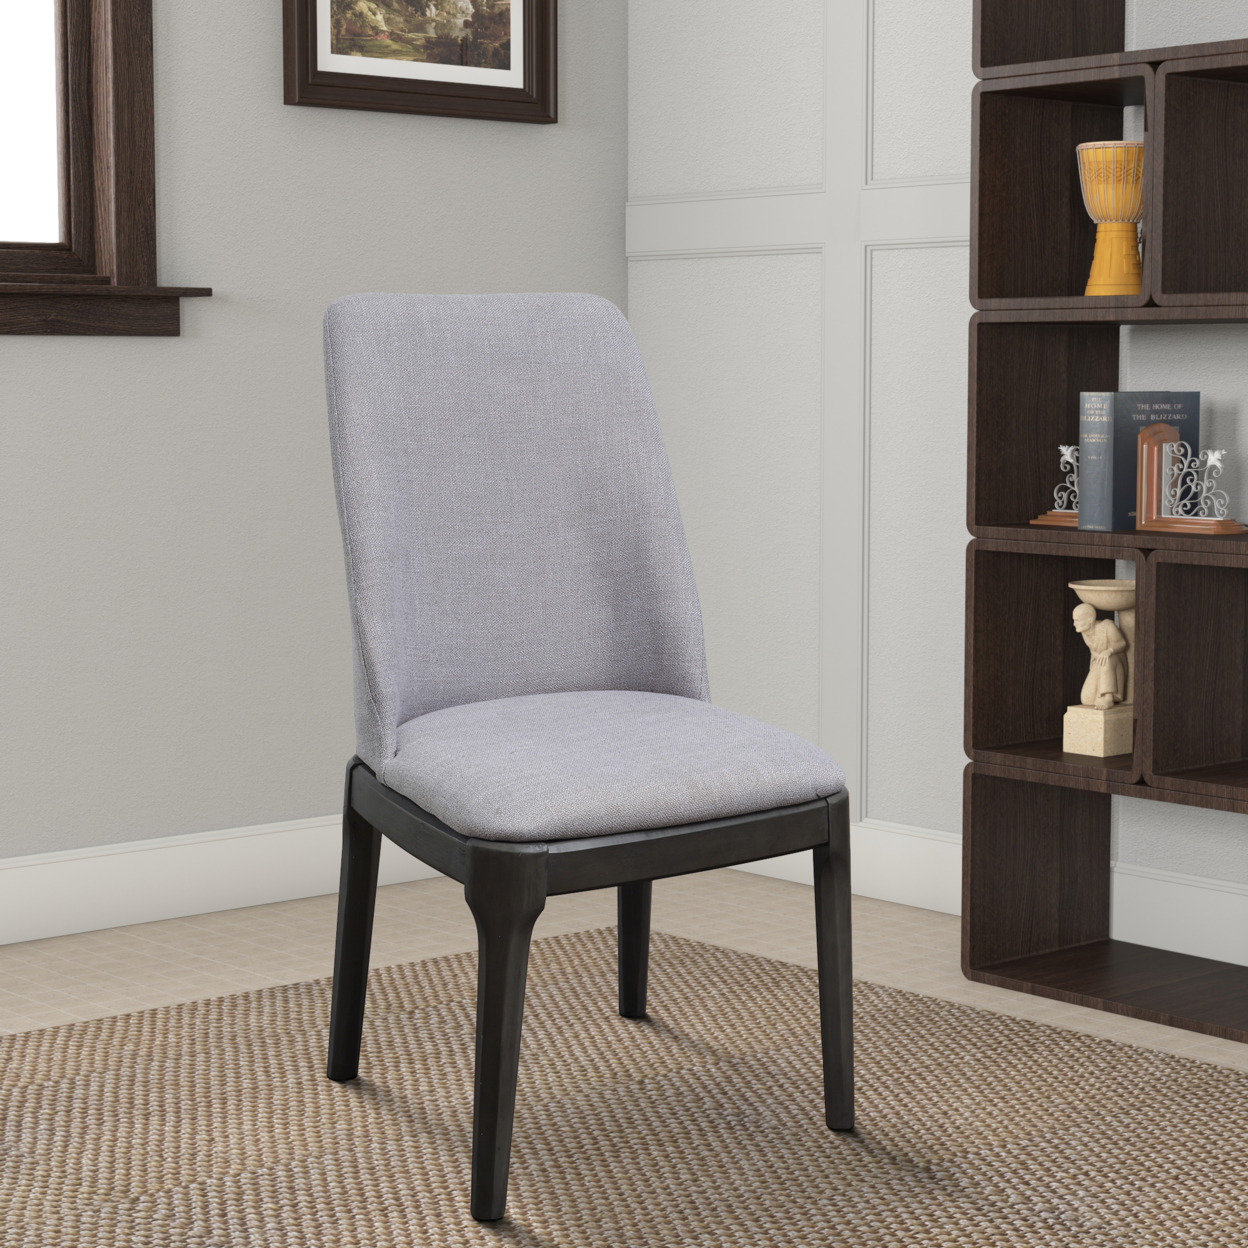 Linen Upholstered Wooden Side Chair With Curved Backrest And Block Legs, Set Of 2, Gray- Saltoro Sherpi